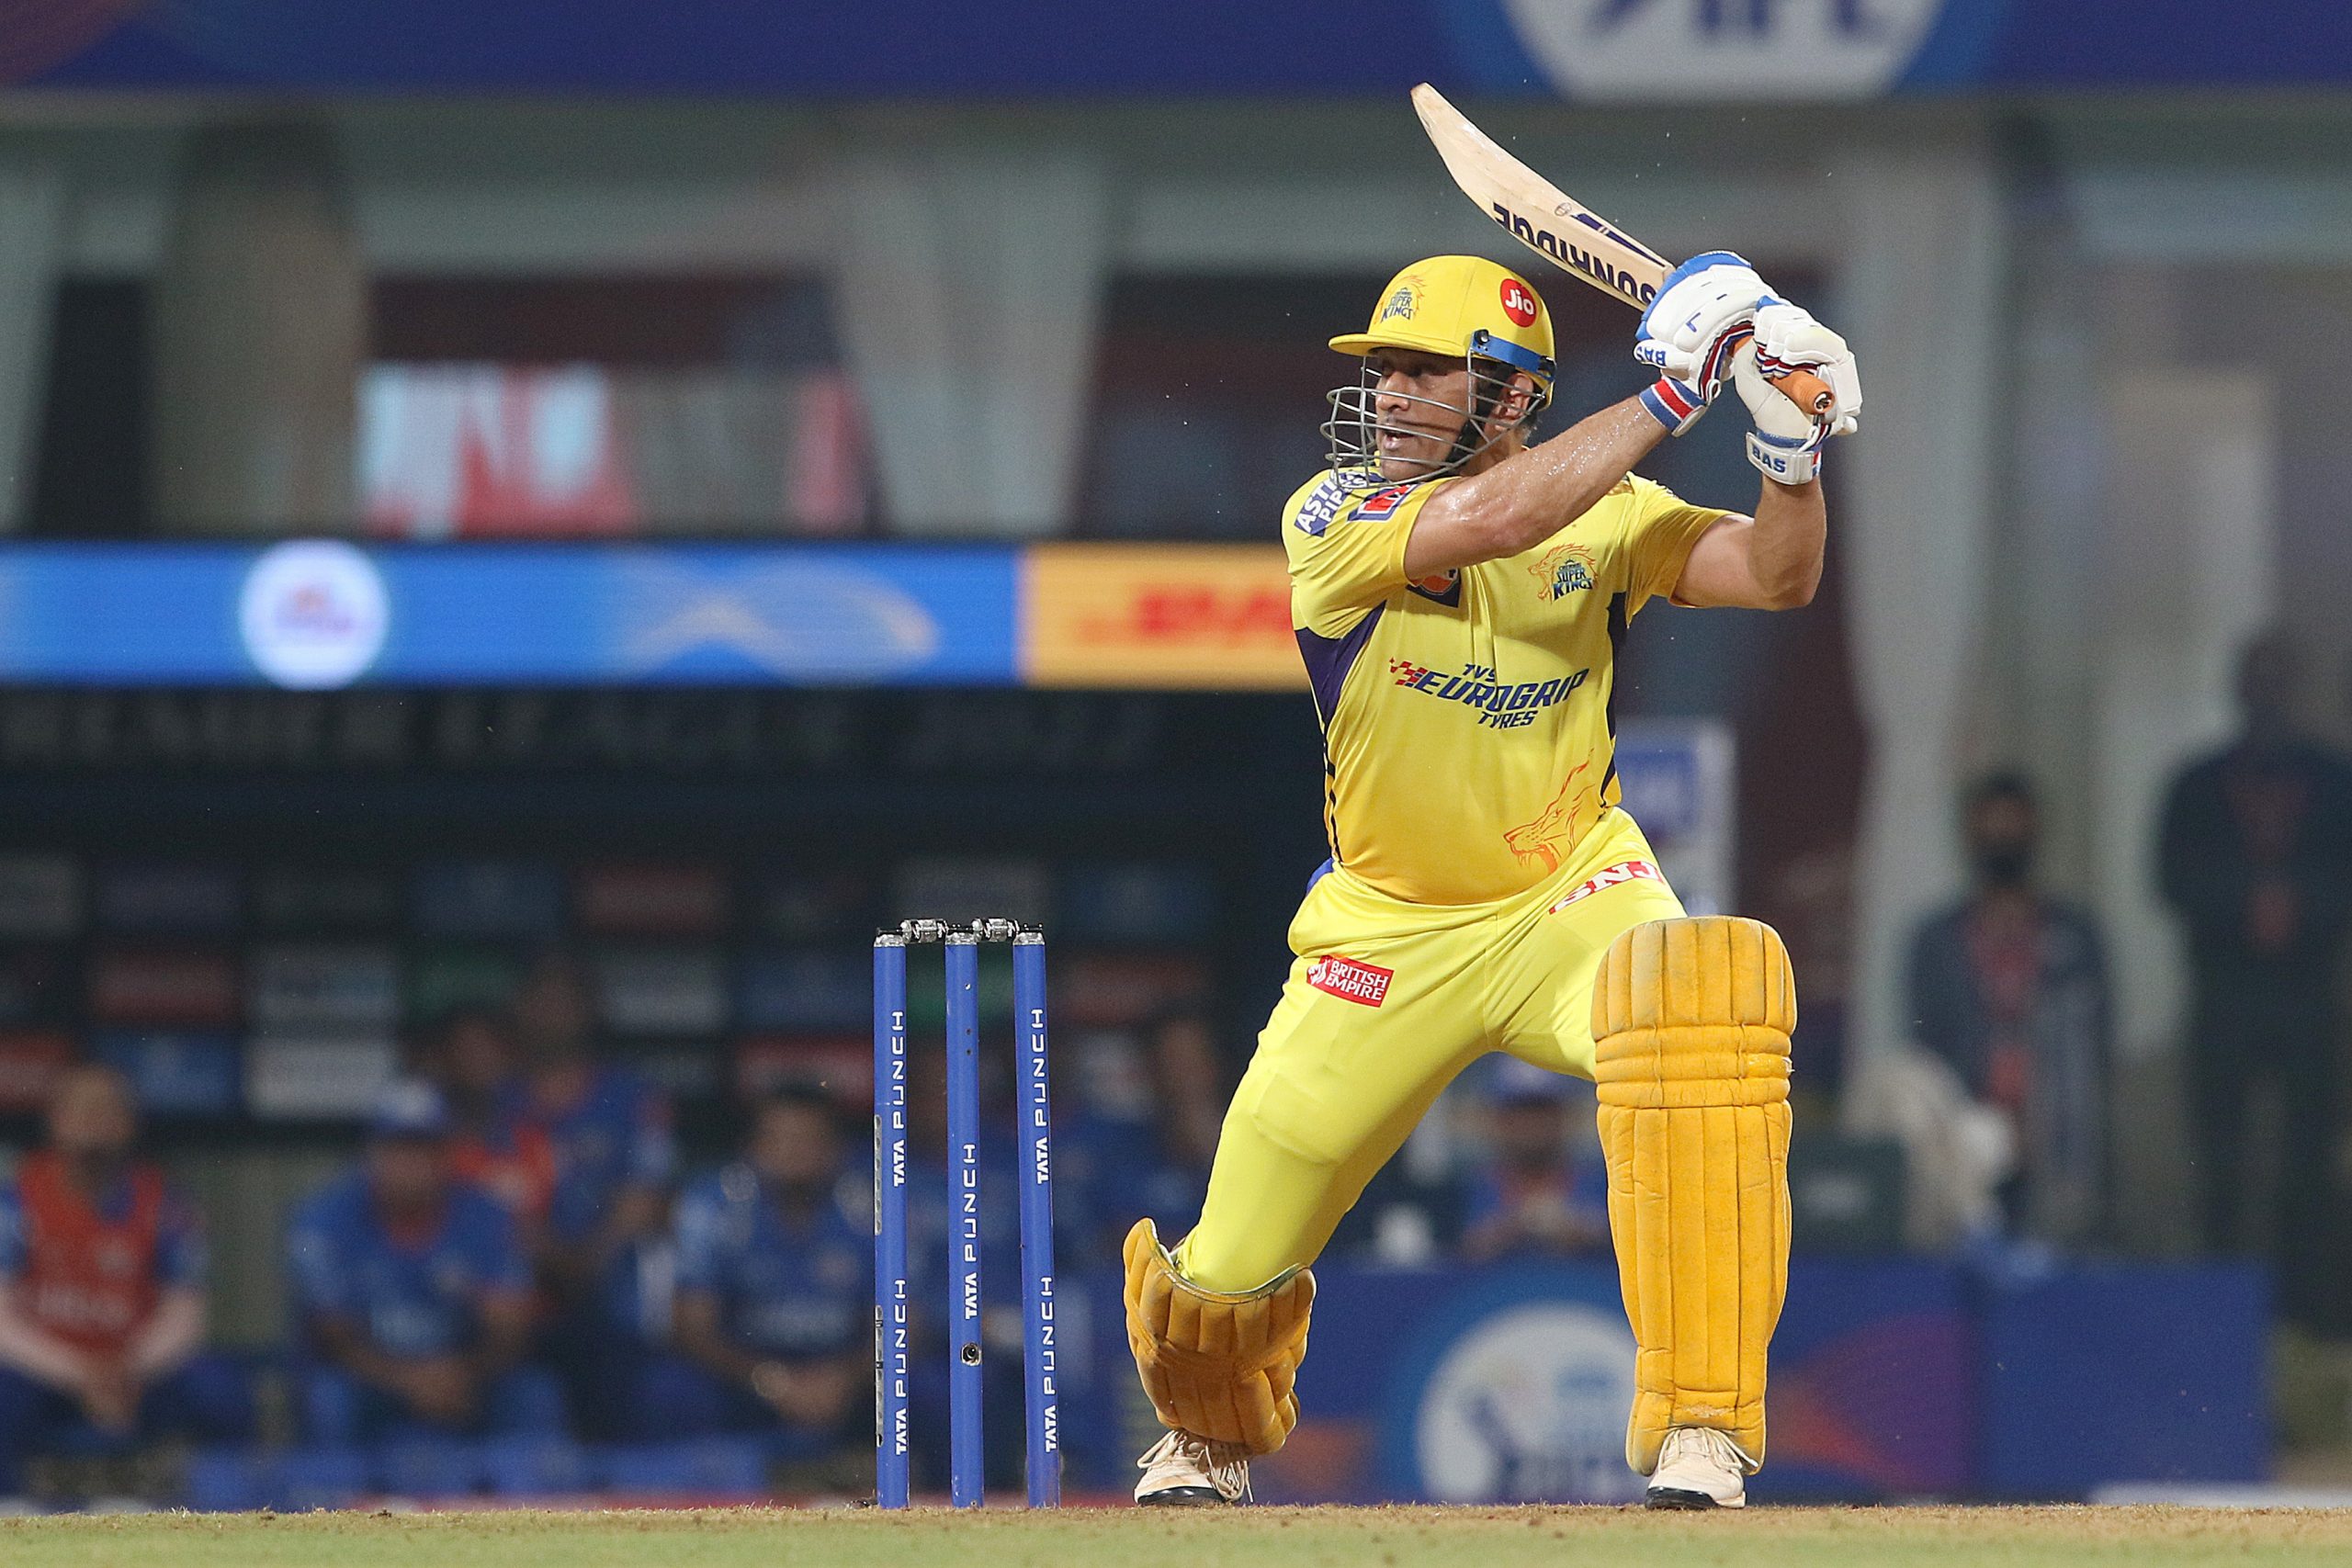 IPL 2022: Will the sun rise for CSK with Dhoni back as captain?